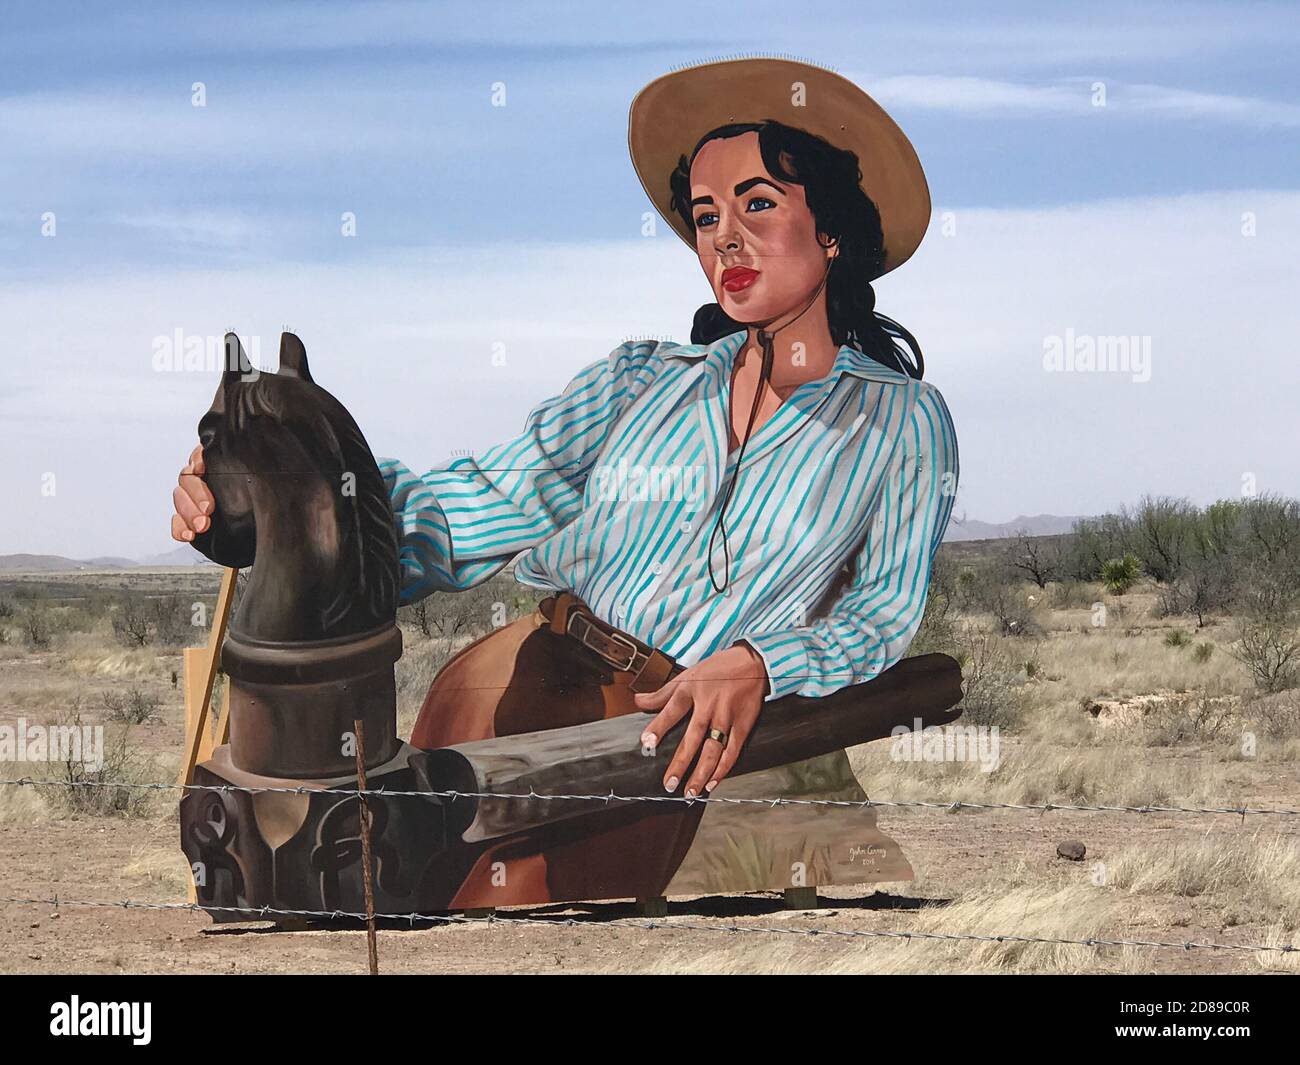 This roadside art near Marfa, Texas pays tribute to the 'Giant' movie, starring Liz Taylor.  Giant made Marfa Texas famous. Stock Photo